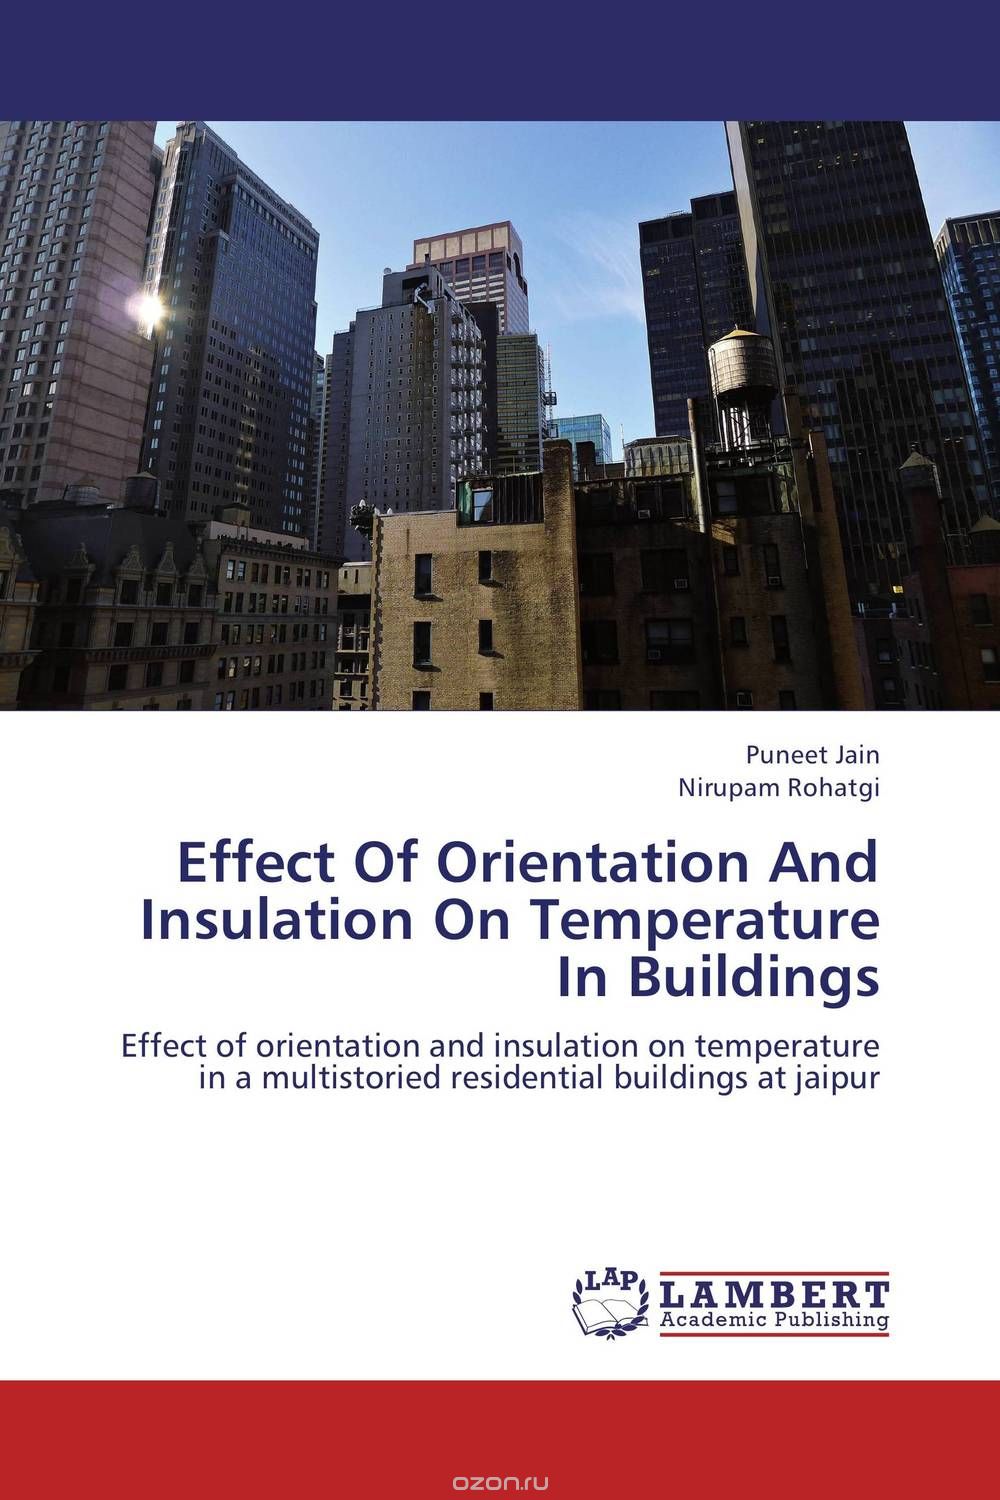 Effect Of Orientation And Insulation On Temperature In Buildings